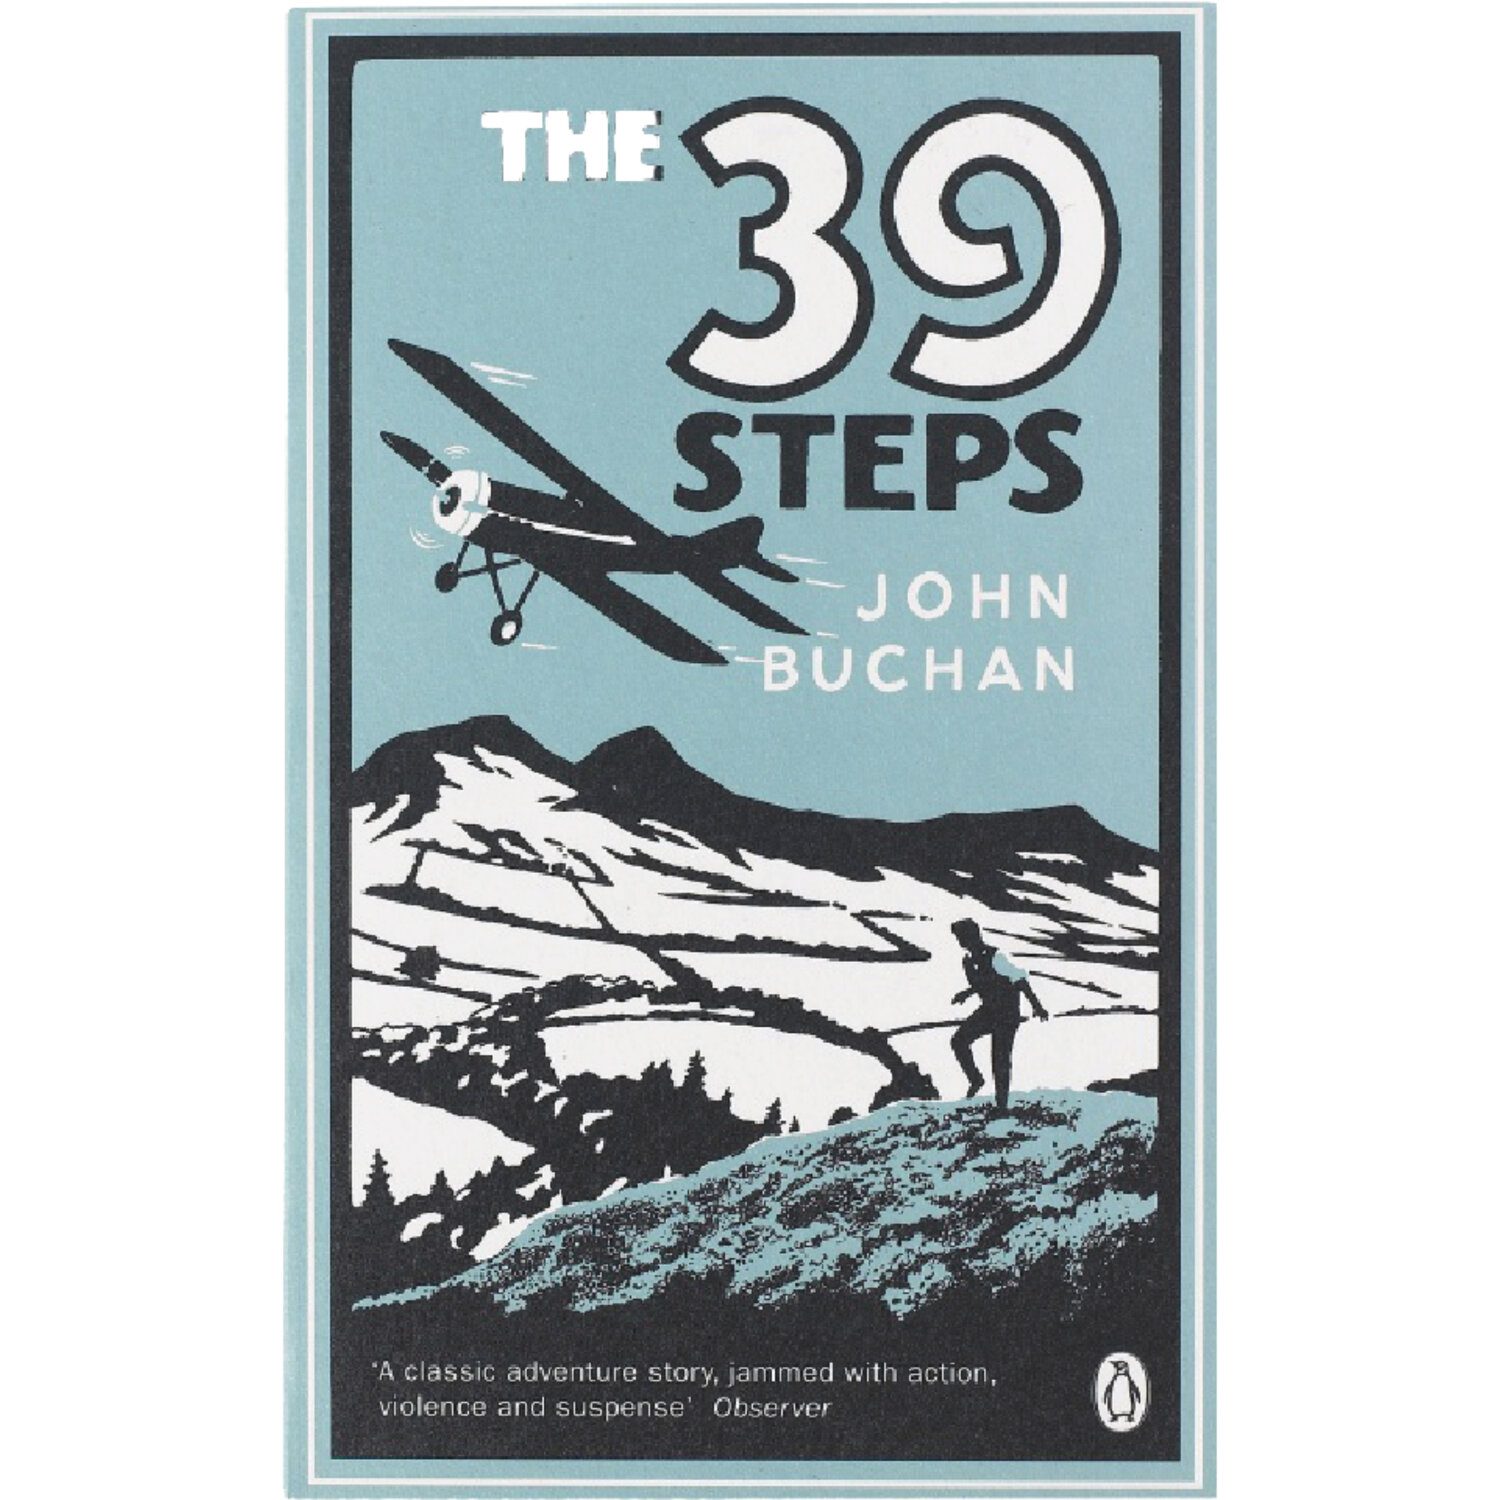 book review 39 steps